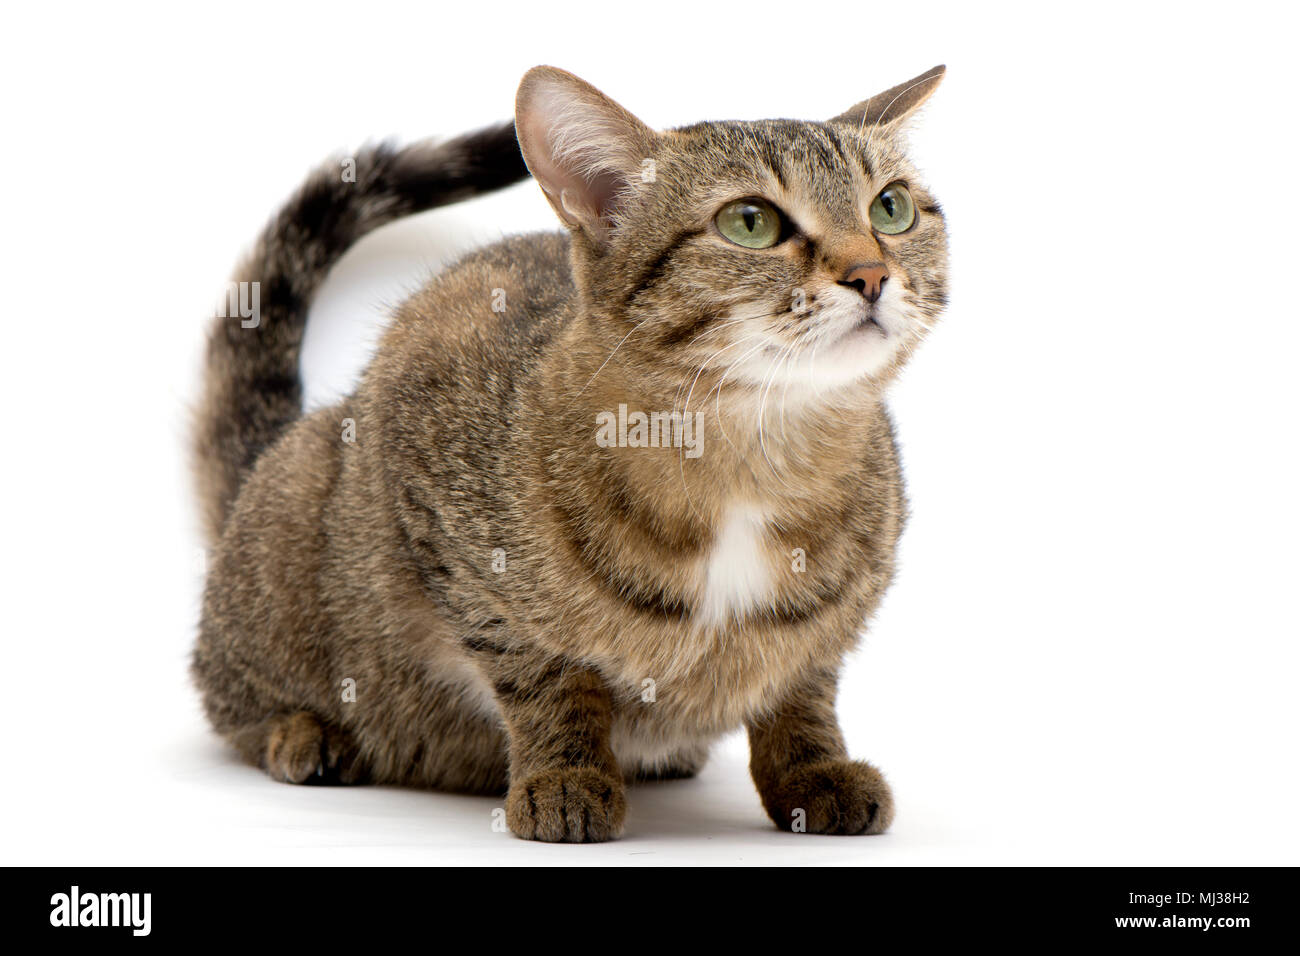 he tense cat ready to pounce on a white background Stock Photo